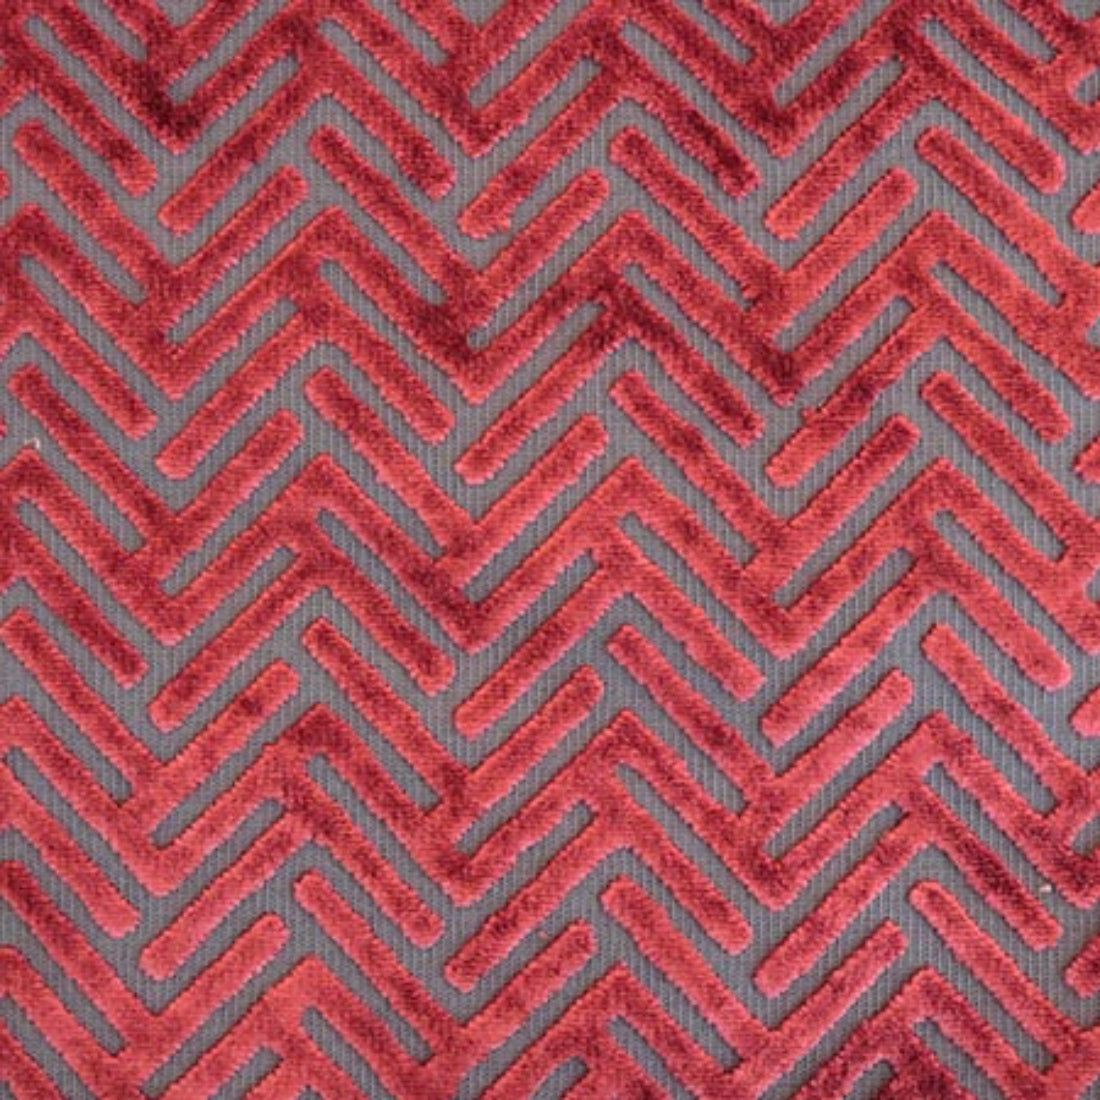 Apollo - Geometric Burnout Velvet Upholstery Fabric by the Yard